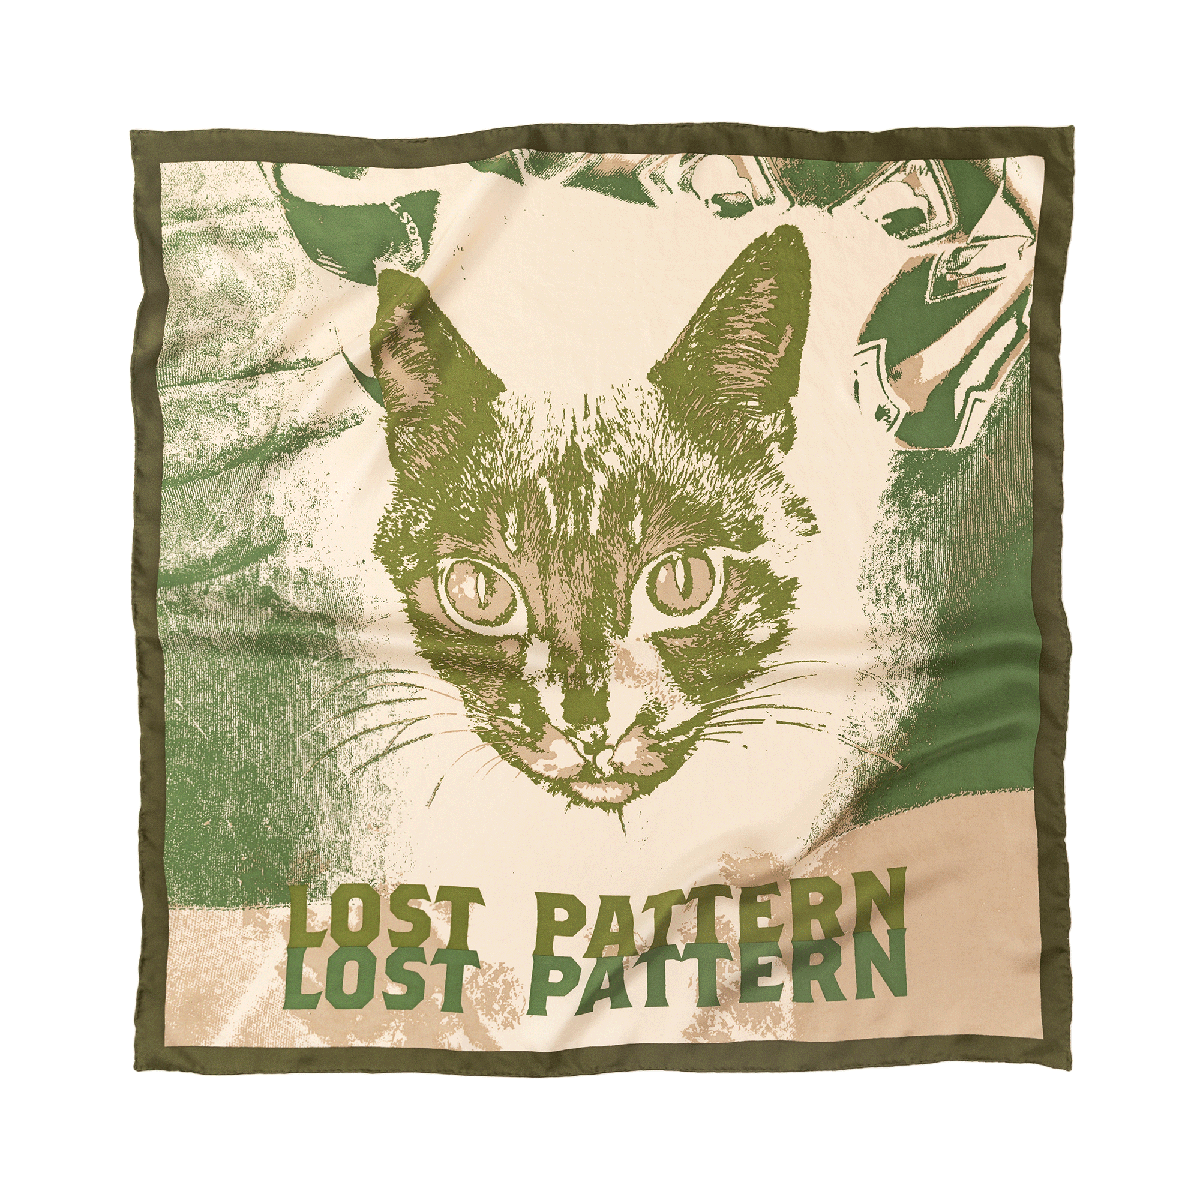 "One Cool Cat" Silk Bandana - Olive Green - Olive Green - LOST PATTERN Silk Square Scarf